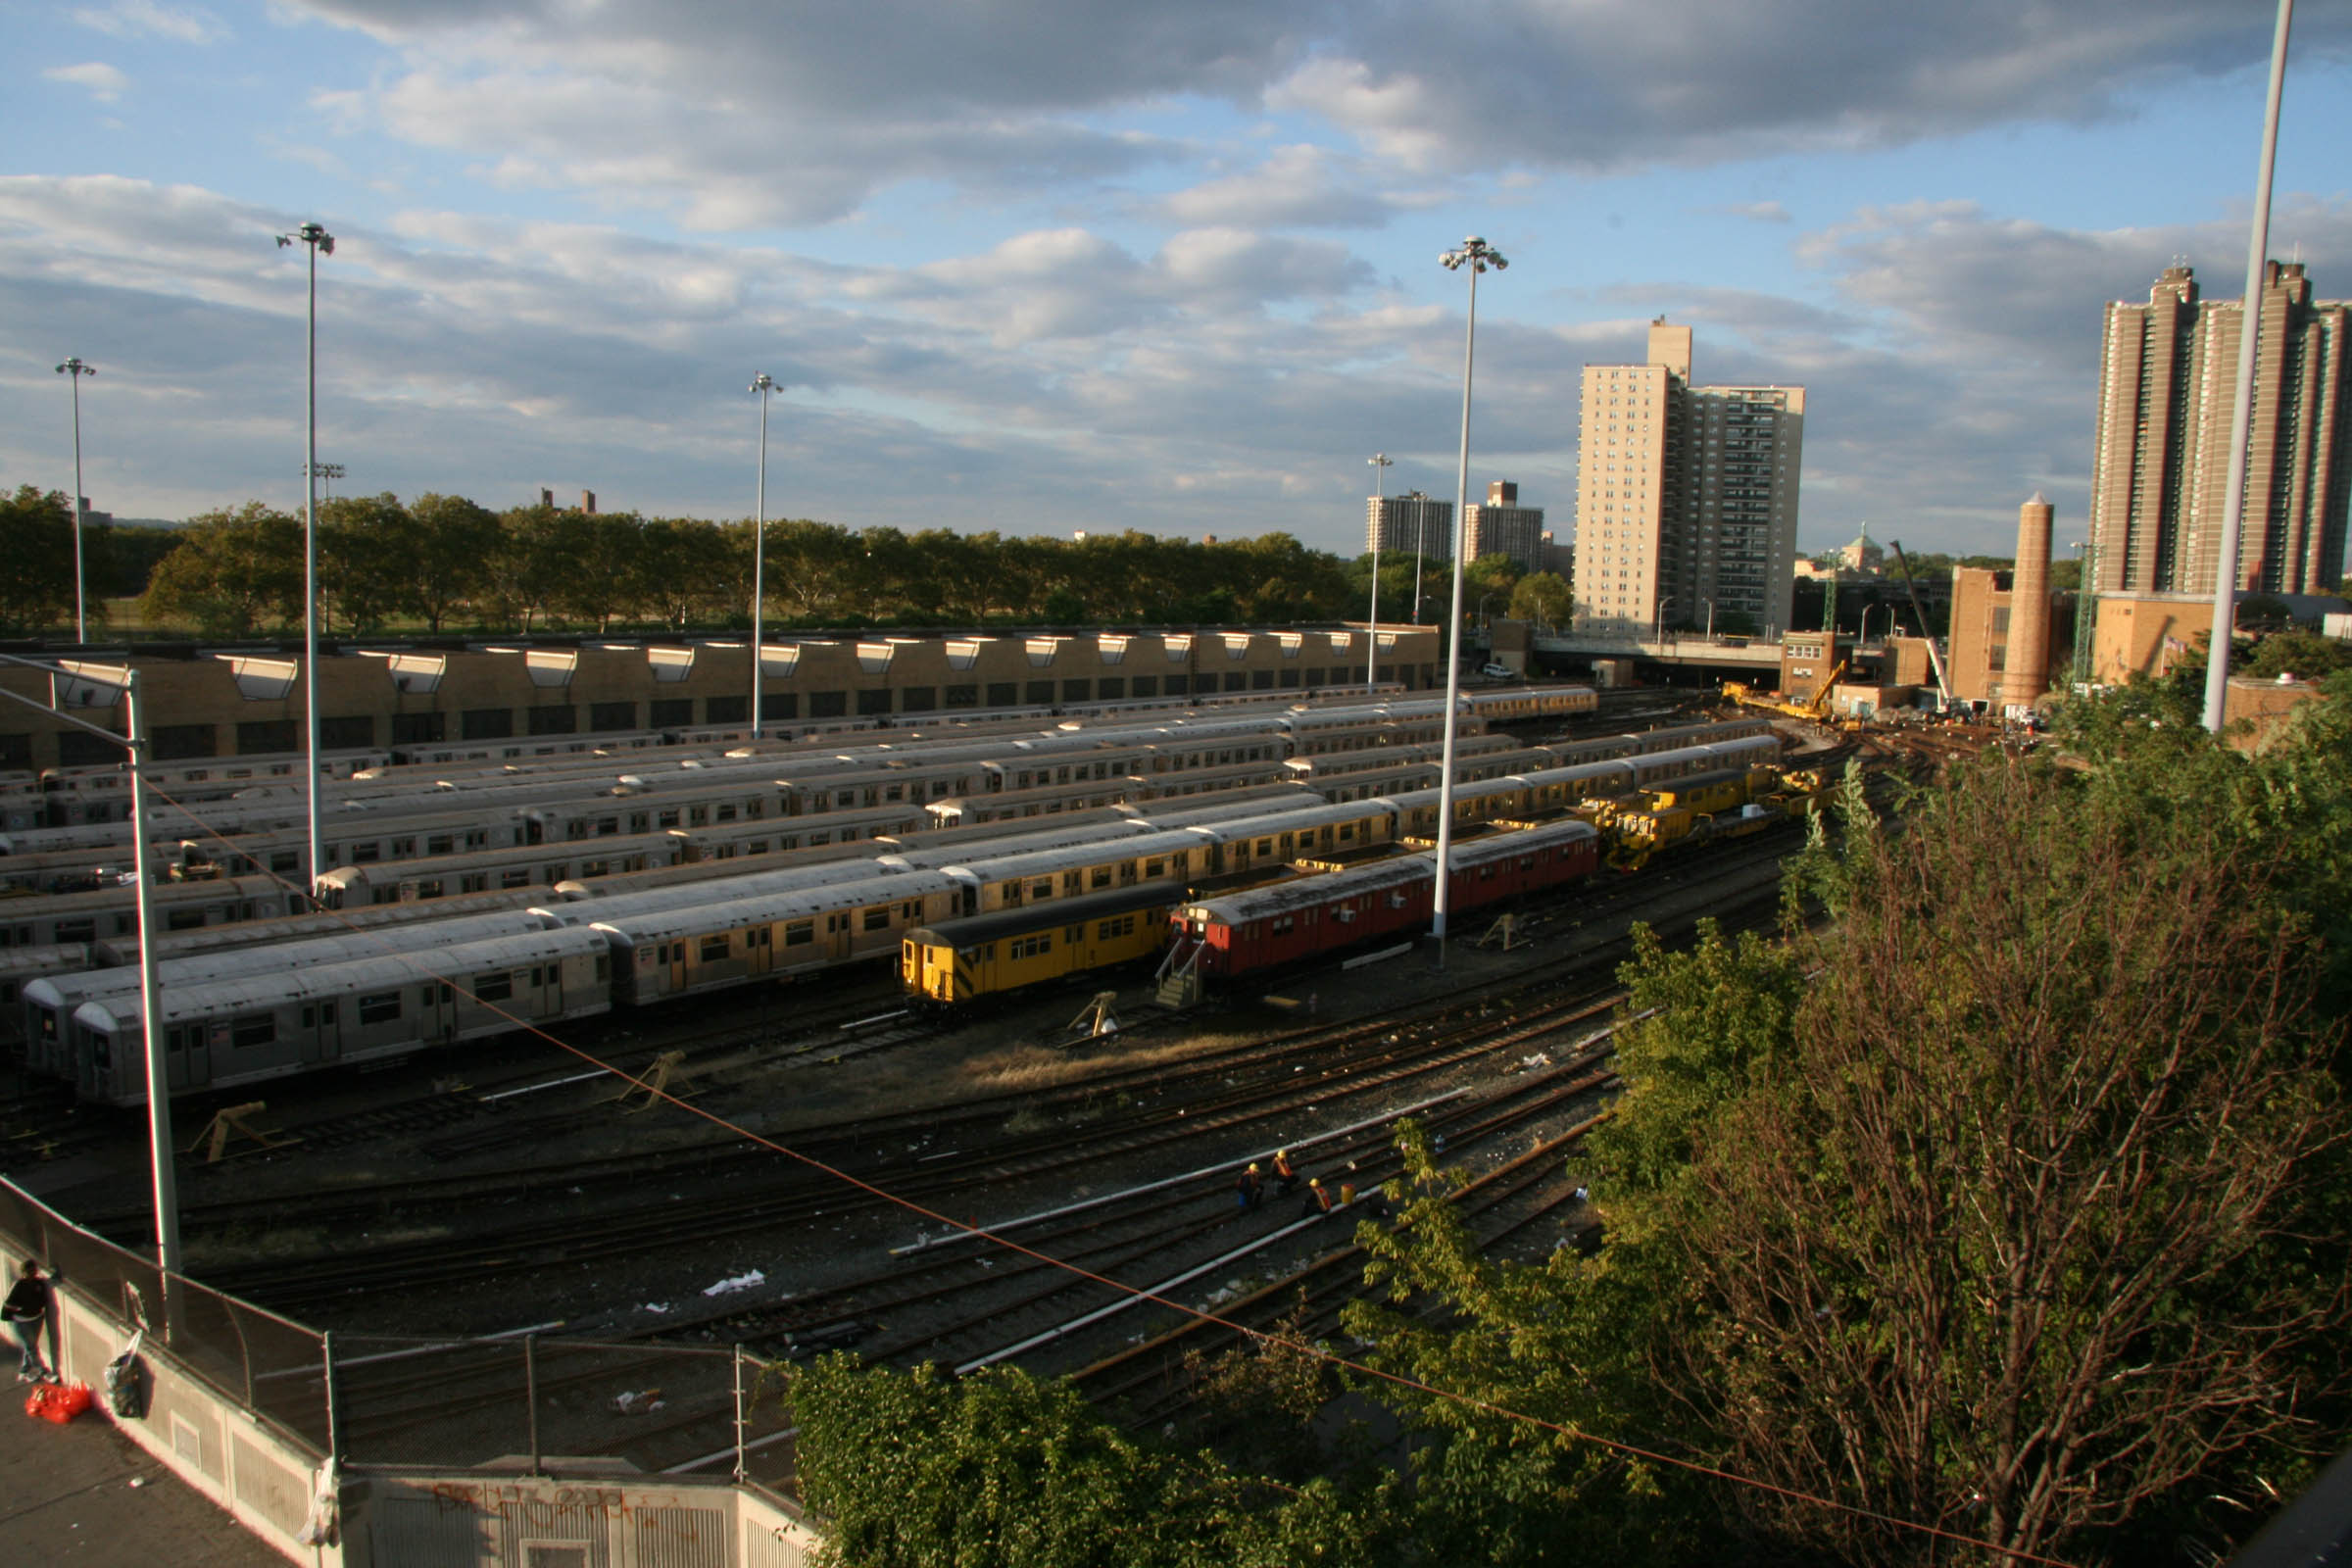 Bedford Park/Grand Concourse Yard, Bedford Park Blvd., the Bronx, NY, 2007.